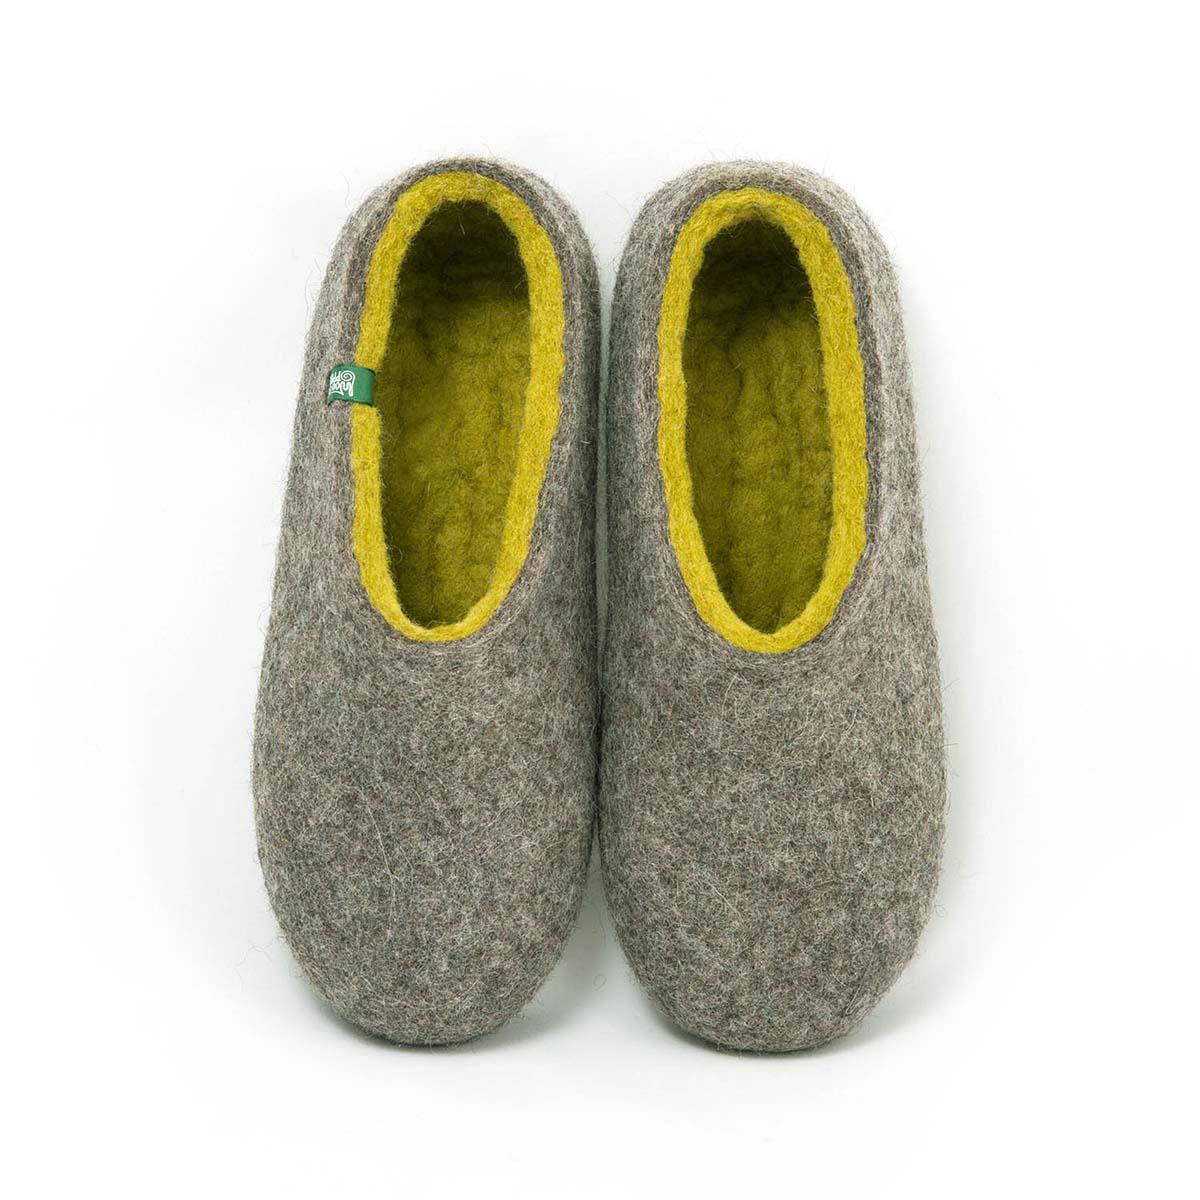 Ethical slippers DUAL NATURAL gray lime